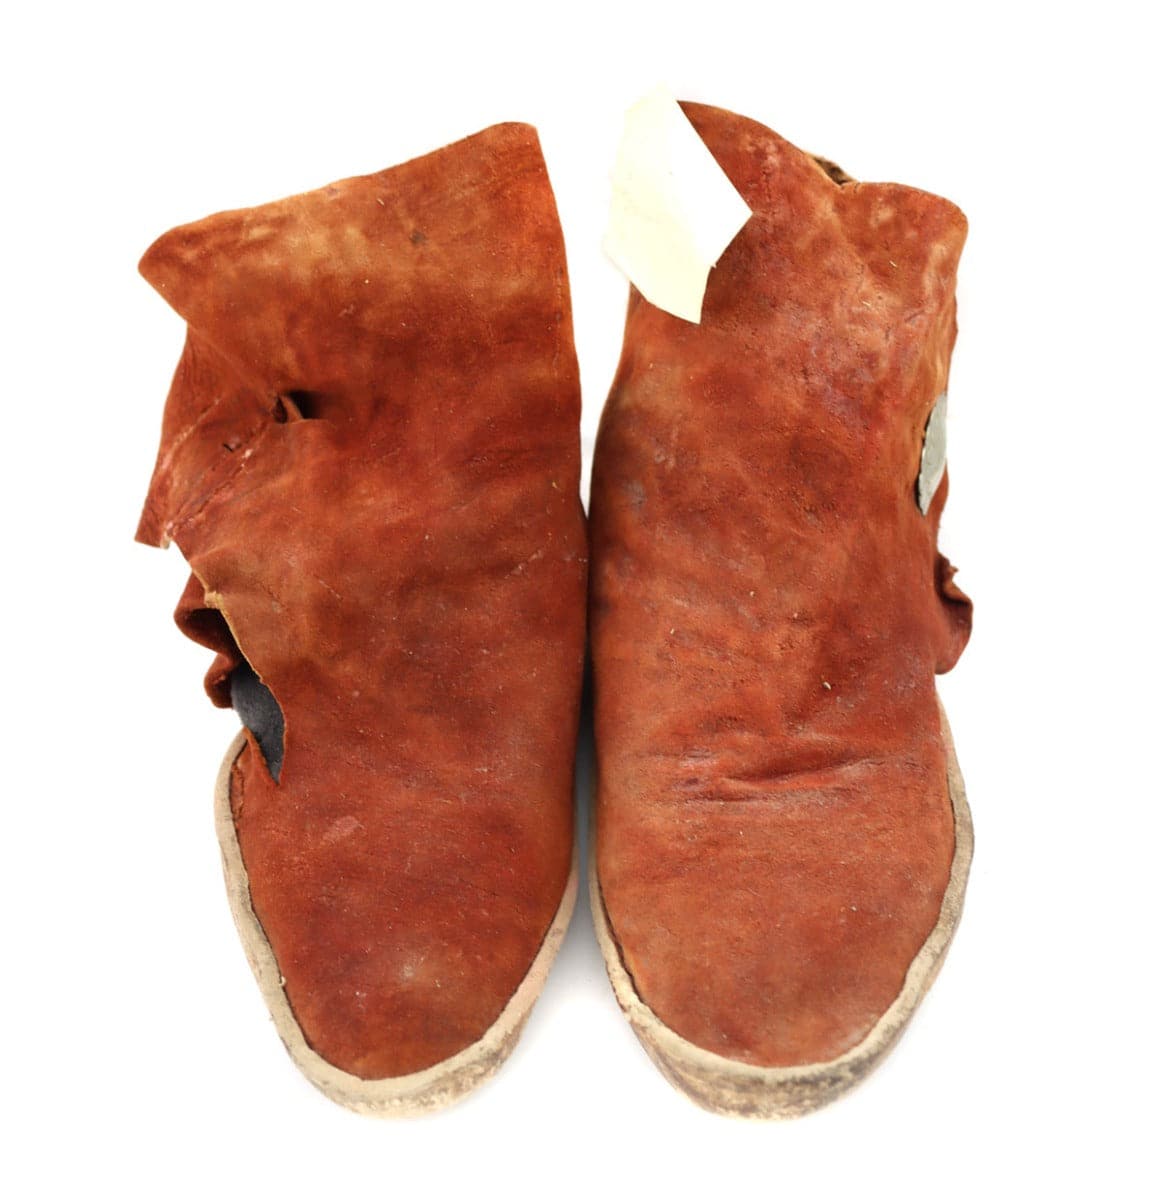 Navajo Leather Moccasins c. 1940-60s, 10" x 6" x 3.75" (M1845) 4
